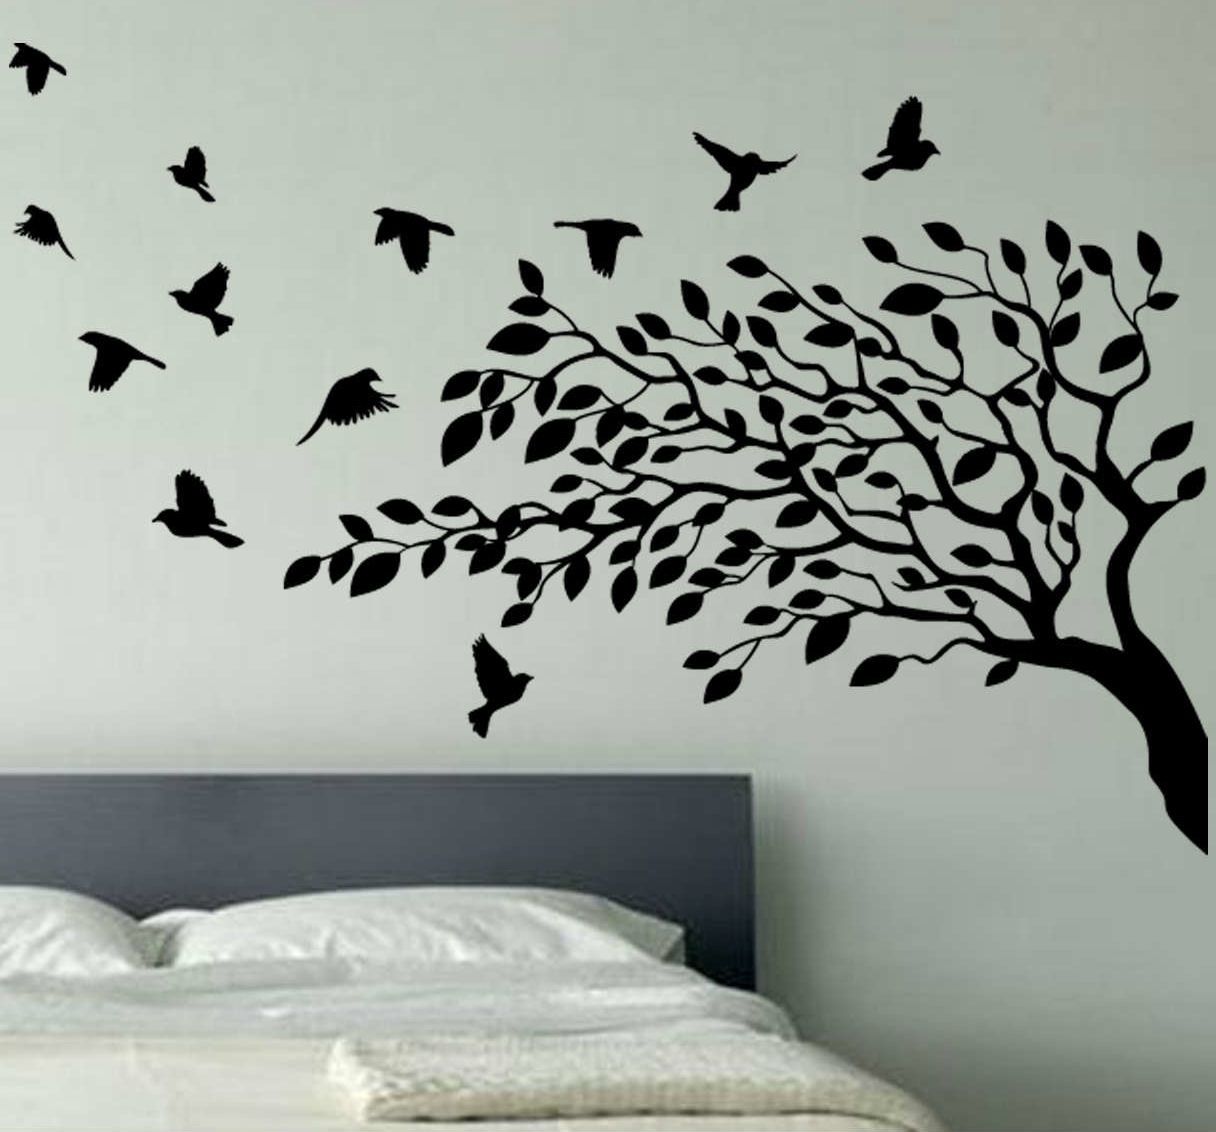 Well Known Wallpaper Wall Decals Stickers Art Vinyl Removable Birdcage Bird Within Metal Birdcage Wall Art (View 9 of 15)